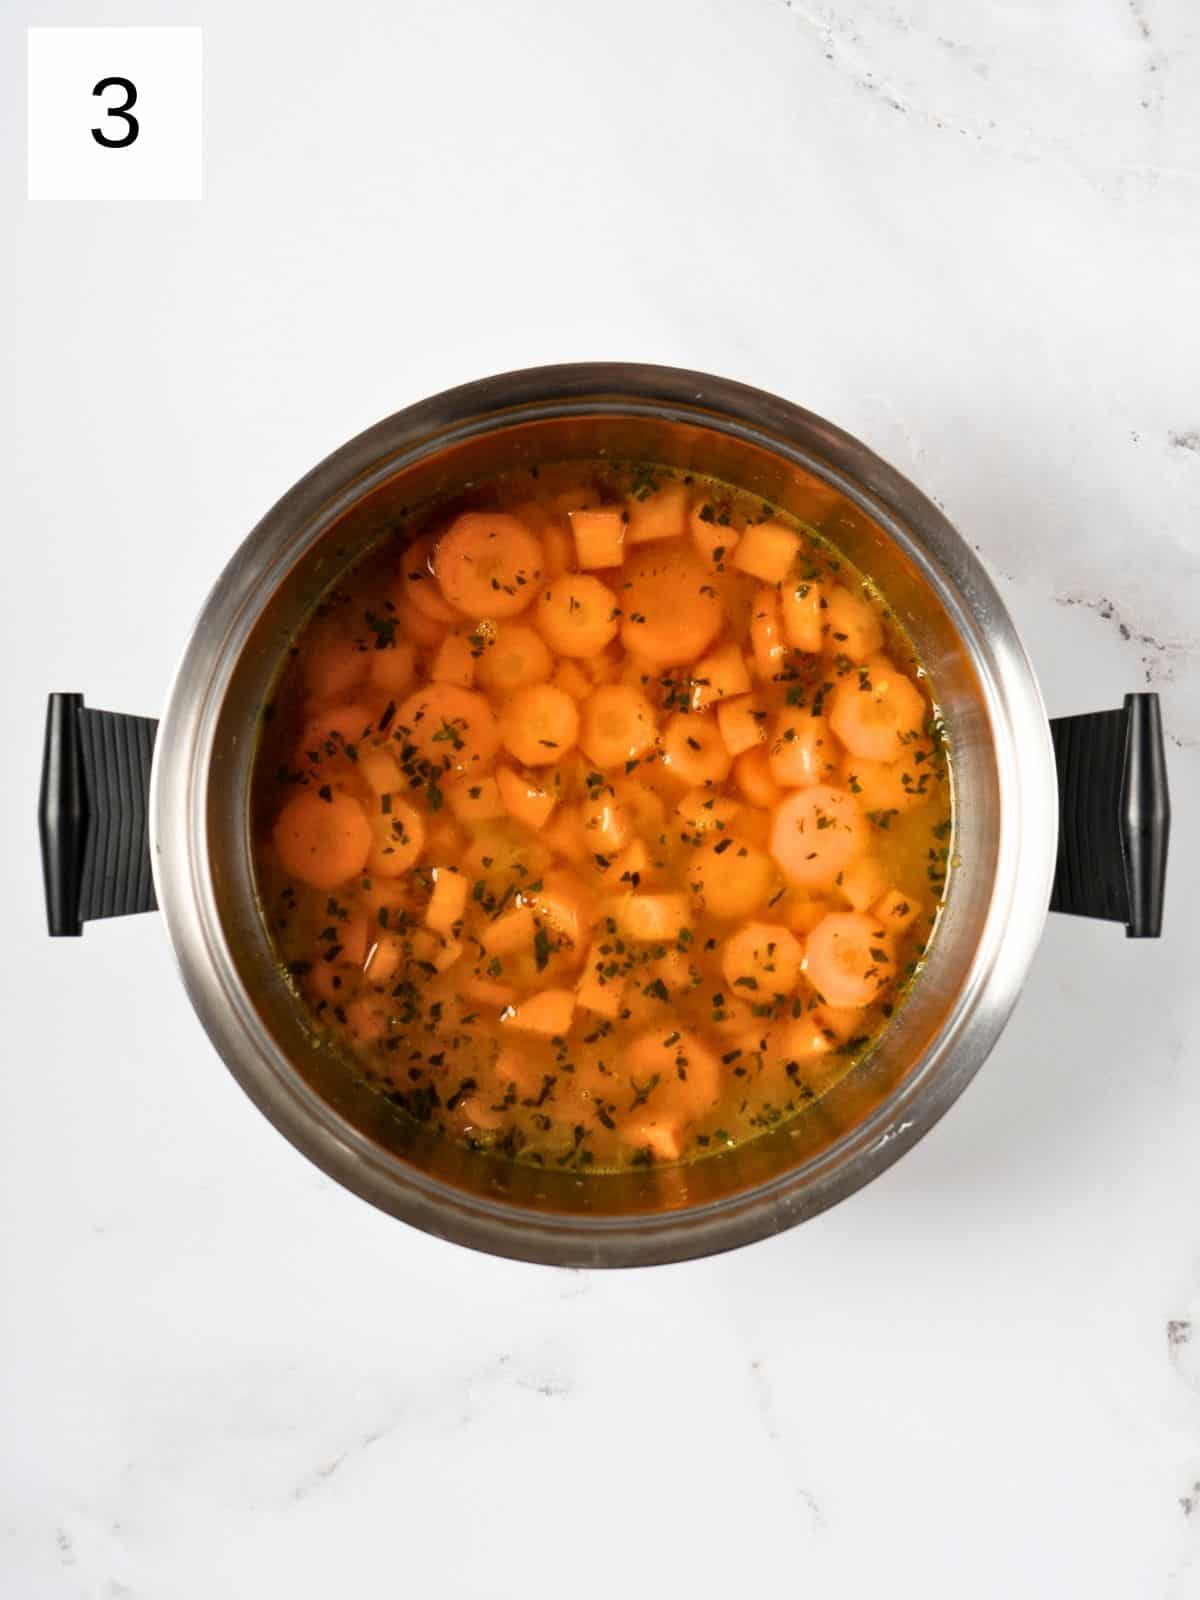 seasoned sweet potatoes and carrots with vegetable broth in a pot.